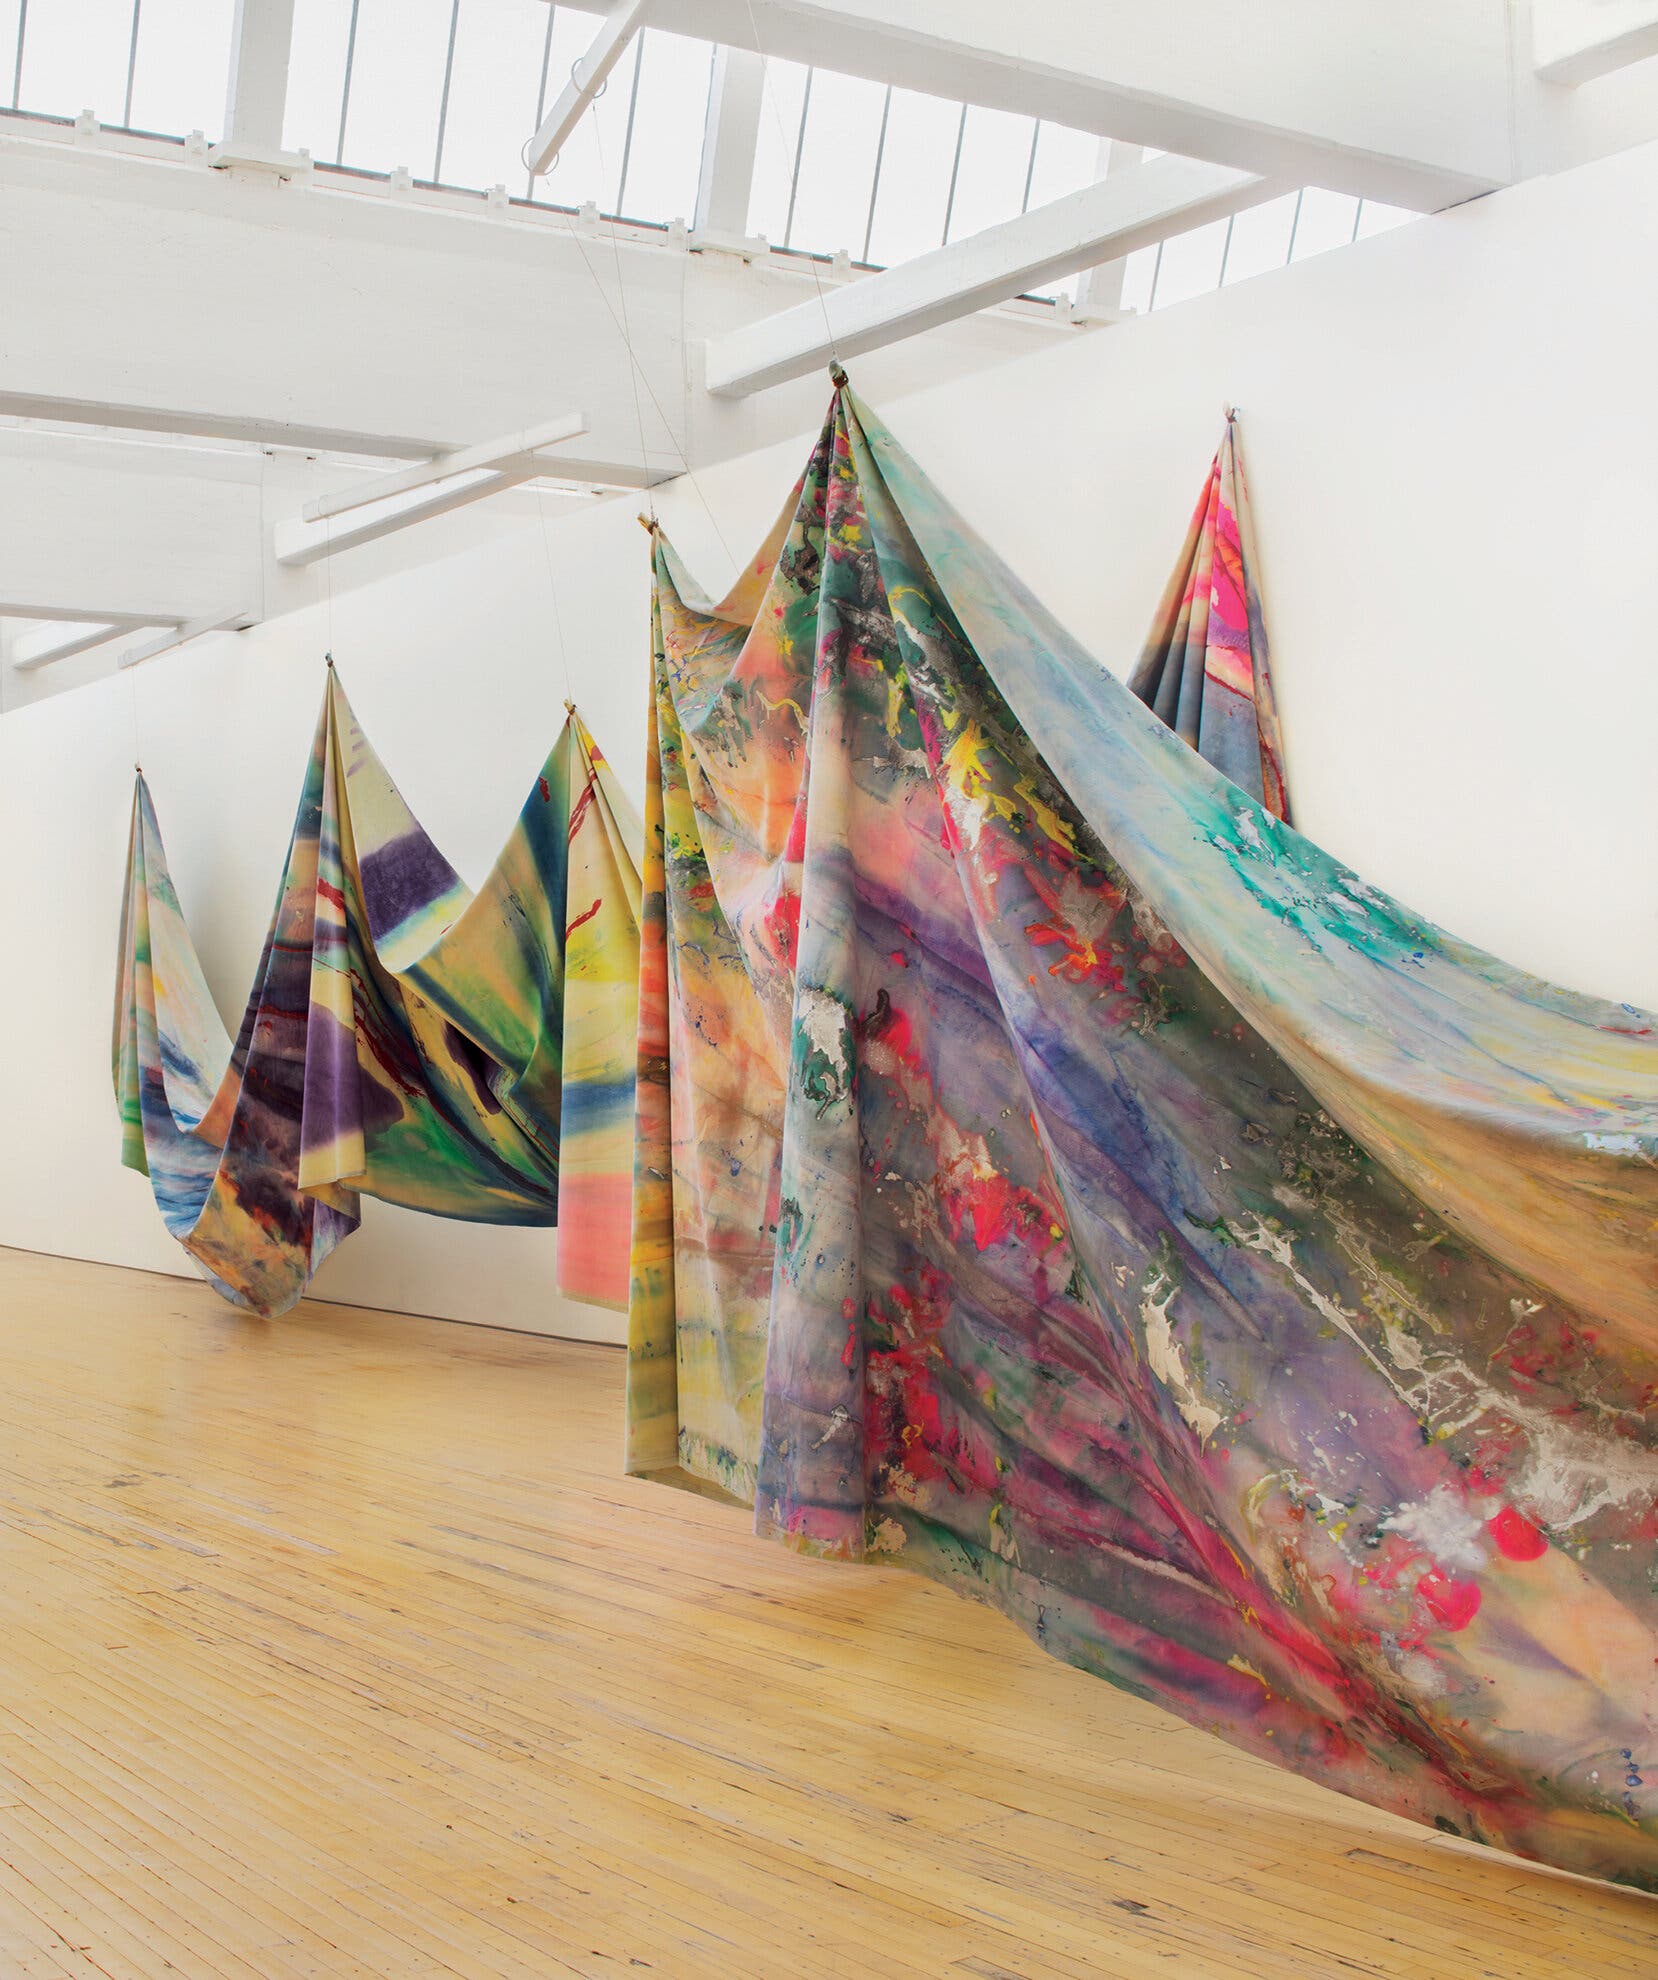 The paintings of Sam Gilliam’s 1968 “Double Merge,” at Dia:Beacon in New York.Credit...© Sam Gilliam/Artists Rights Society (ARS), New York. Photo: Bill Jacobson Studio, New York, courtesy of the Dia Art Foundation